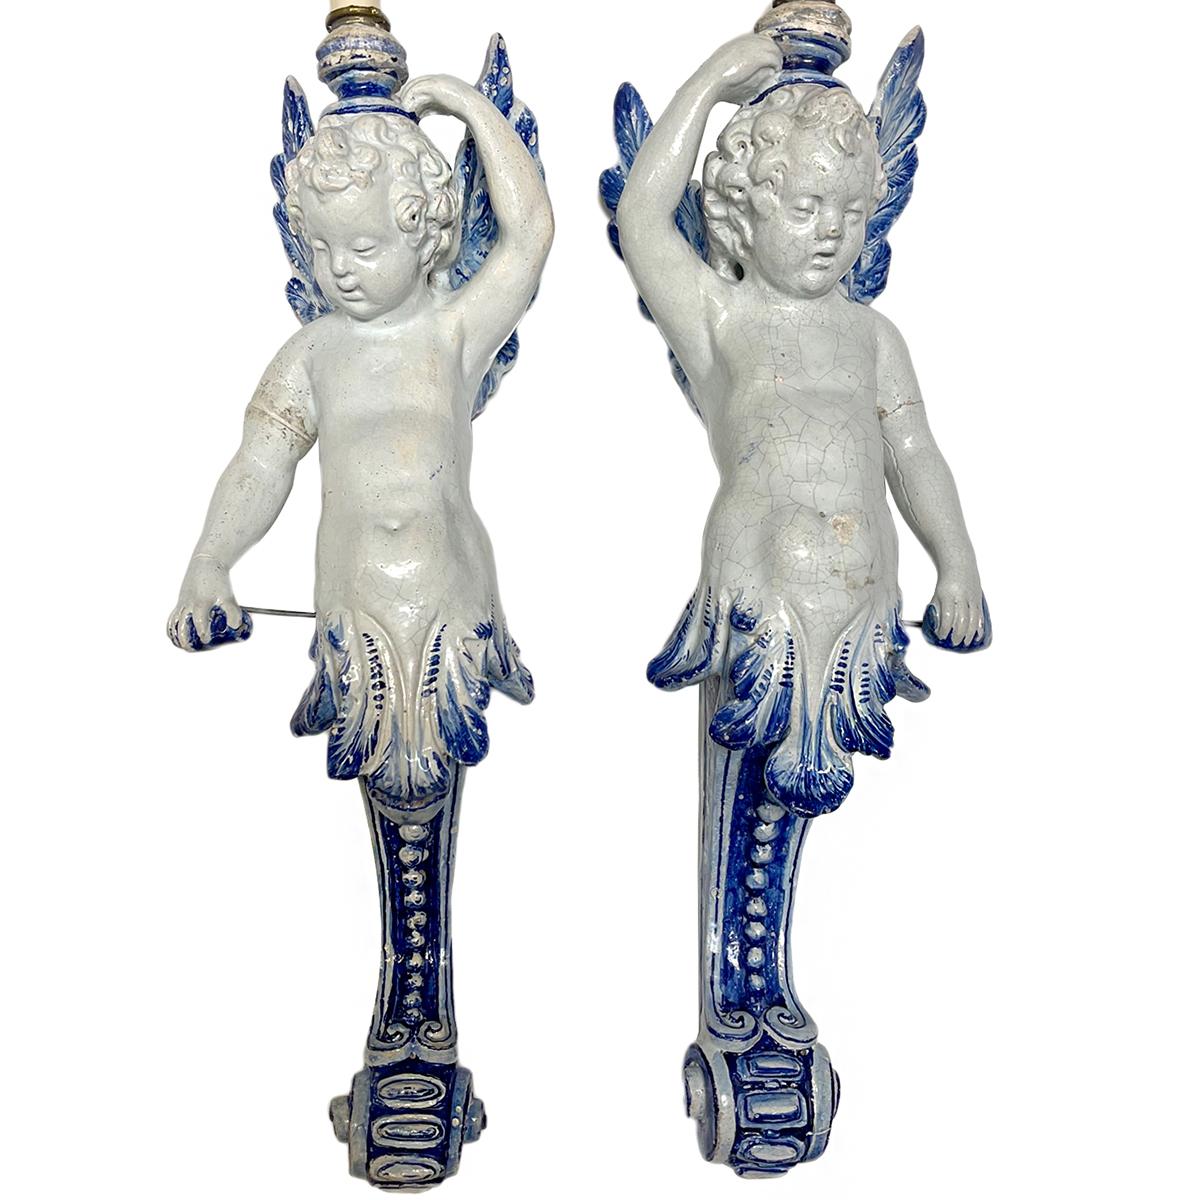 Pair of late 19th Century French porcelain sconces, originally oil, converted to electric.

Measurements:
Height of body alone: 22